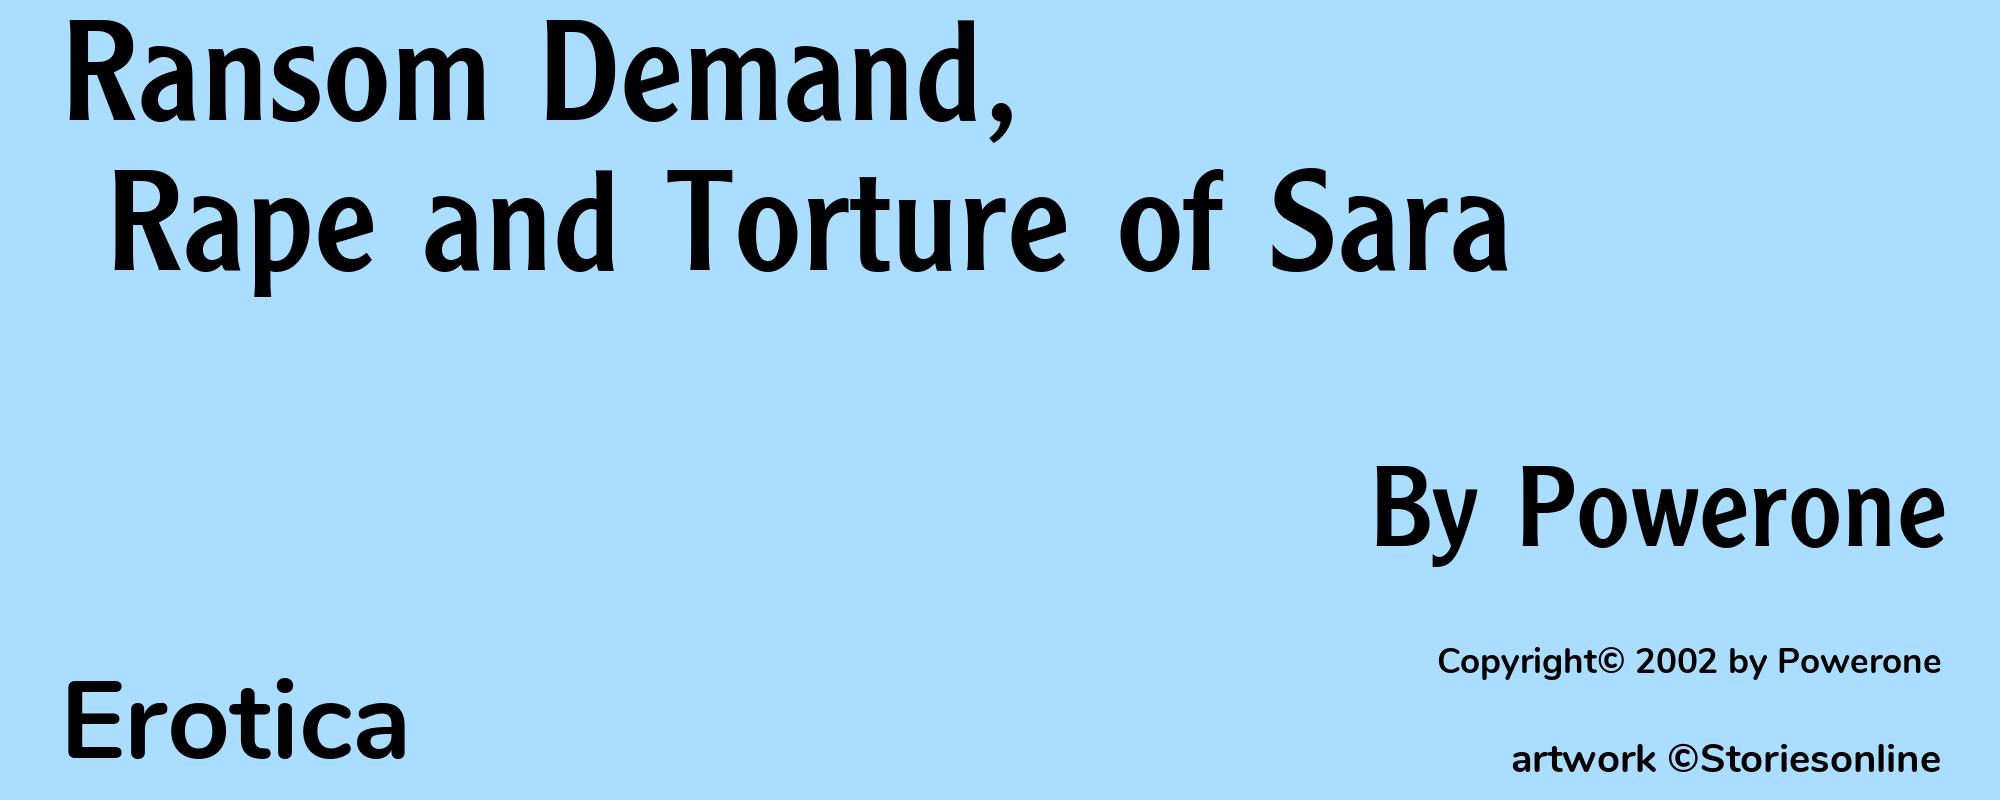 Ransom Demand, Rape and Torture of Sara - Cover